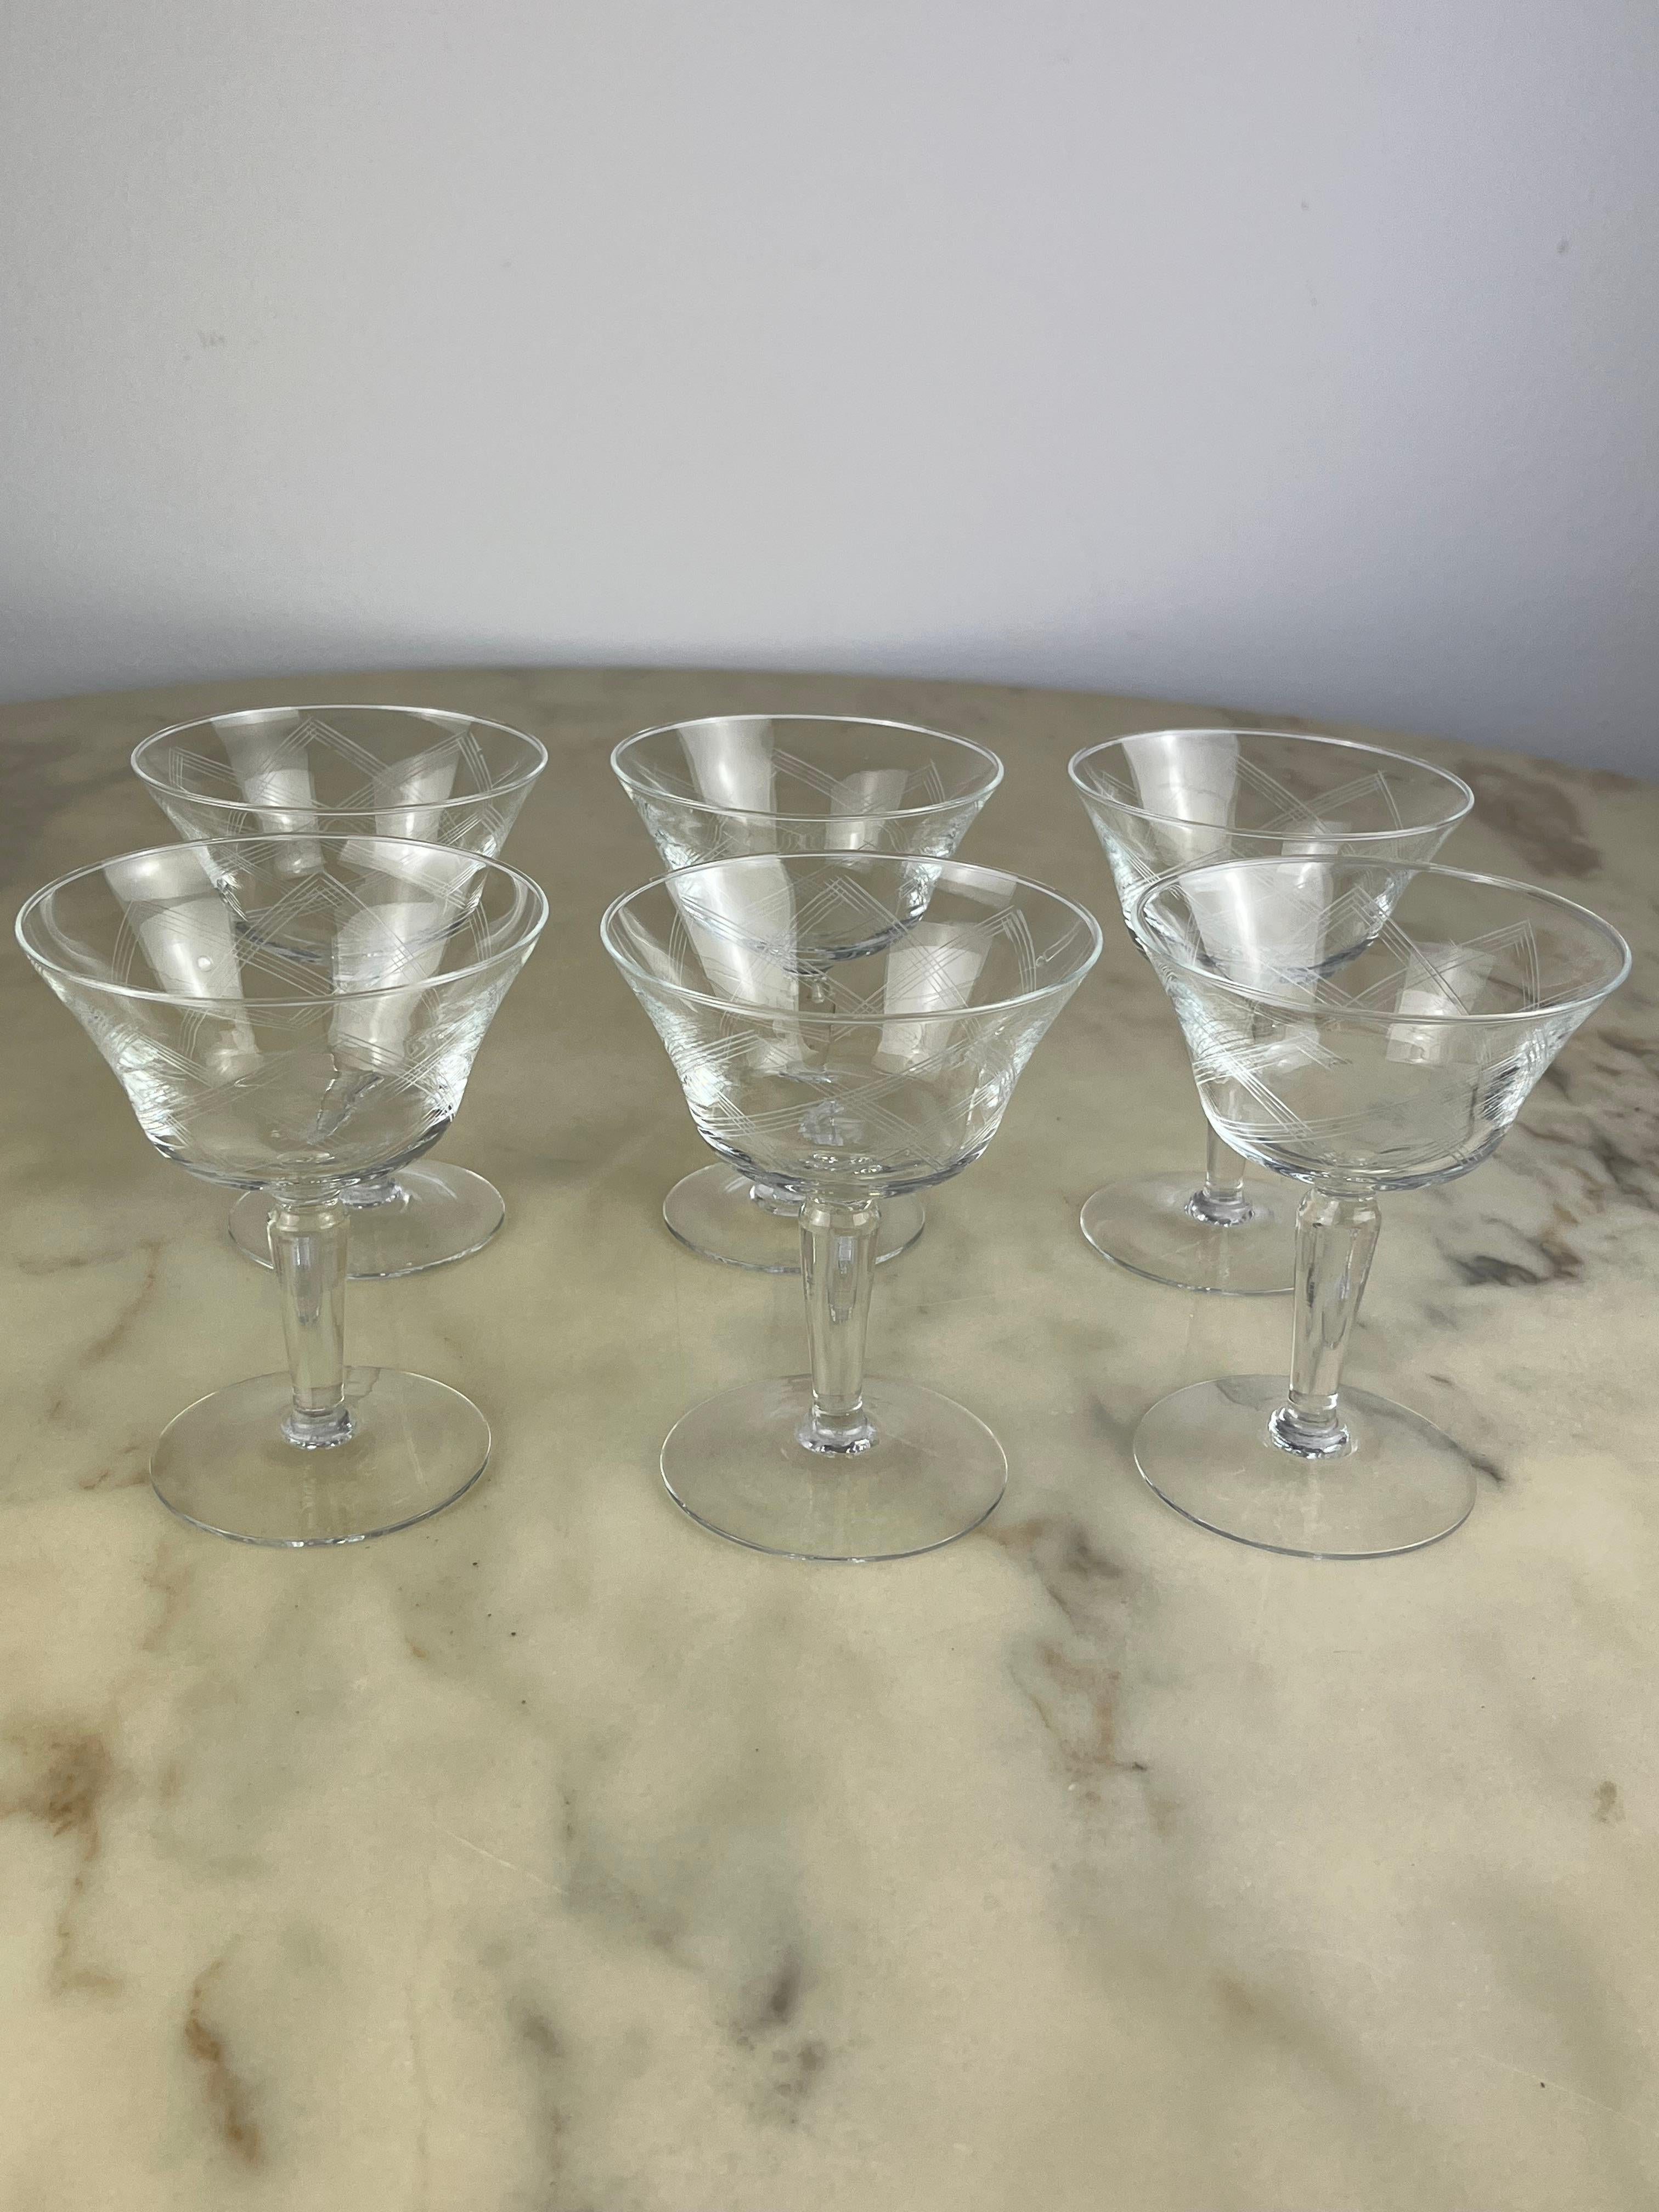 Six hand engraved crystal champagne glasses, Italy, 1960s.
They belonged to my great-grandmother, they are in perfect condition and intact.
Each has a small bubble, typical of handcrafted glass processing.